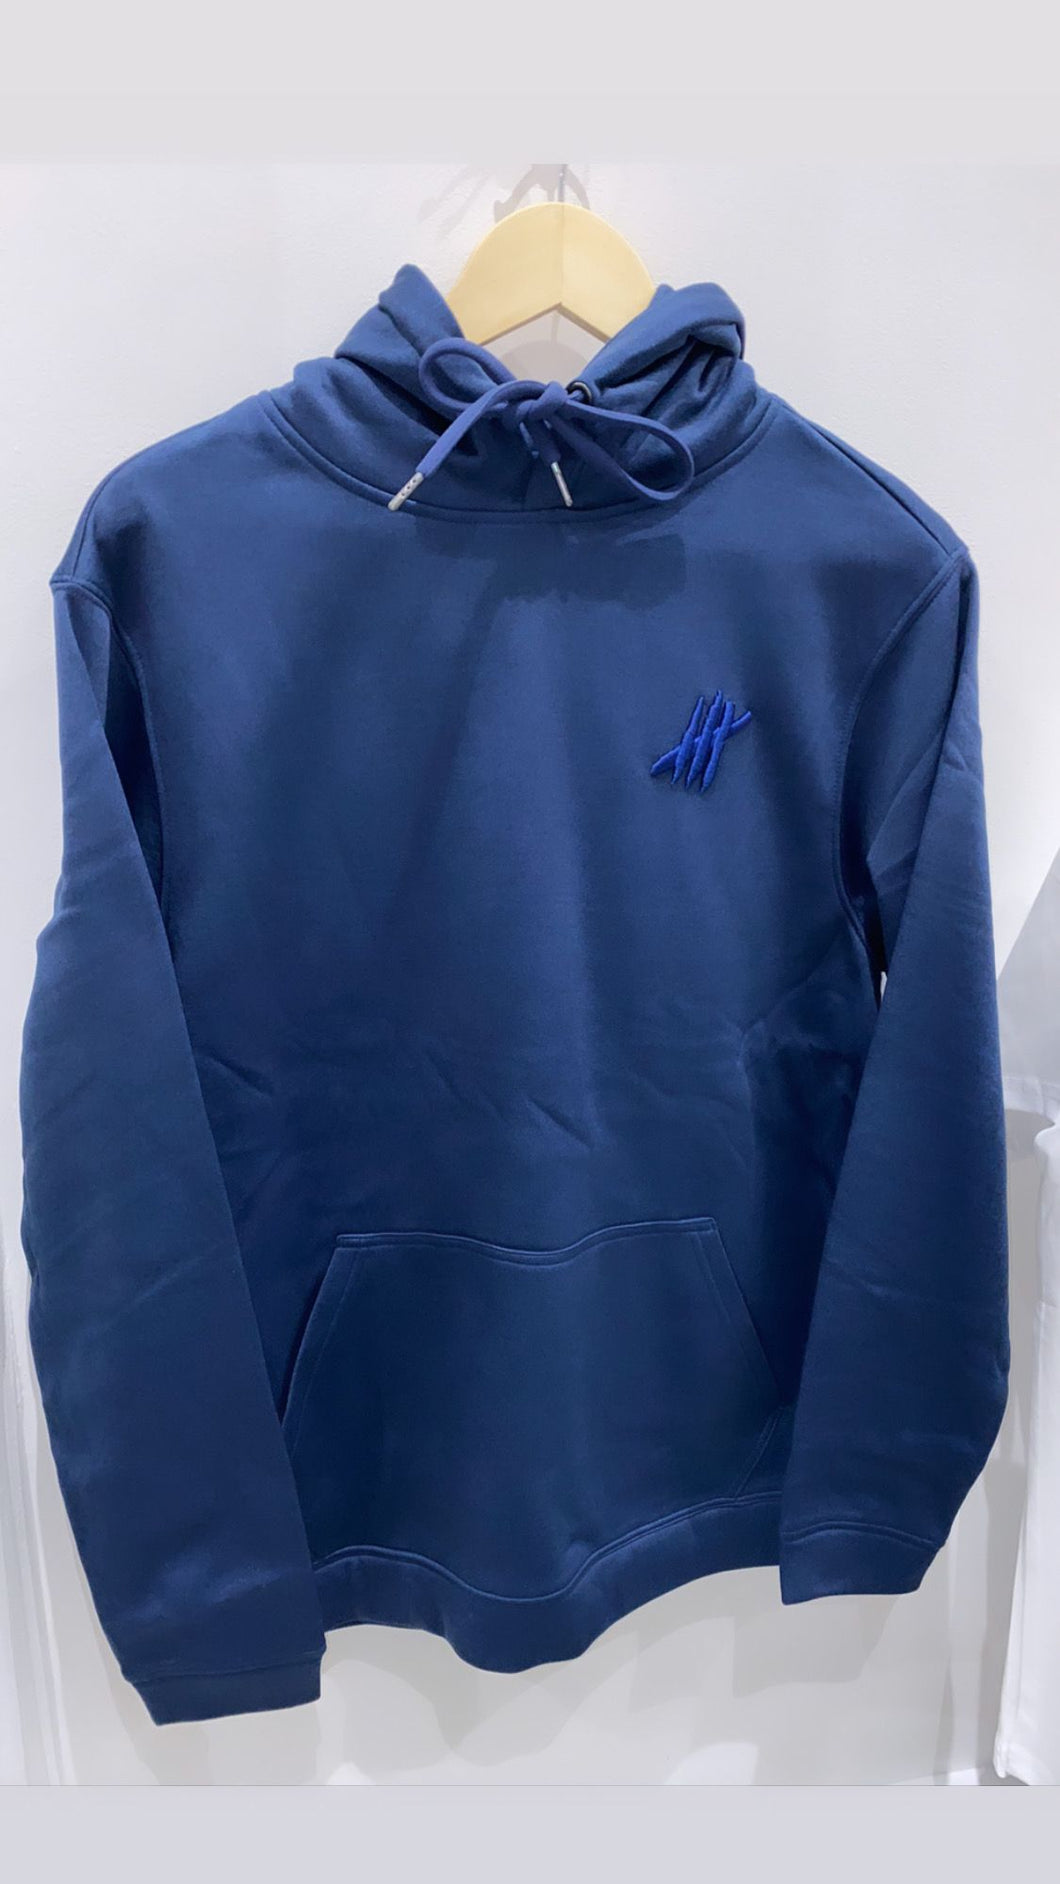 Navy sports hoodie with navy logo